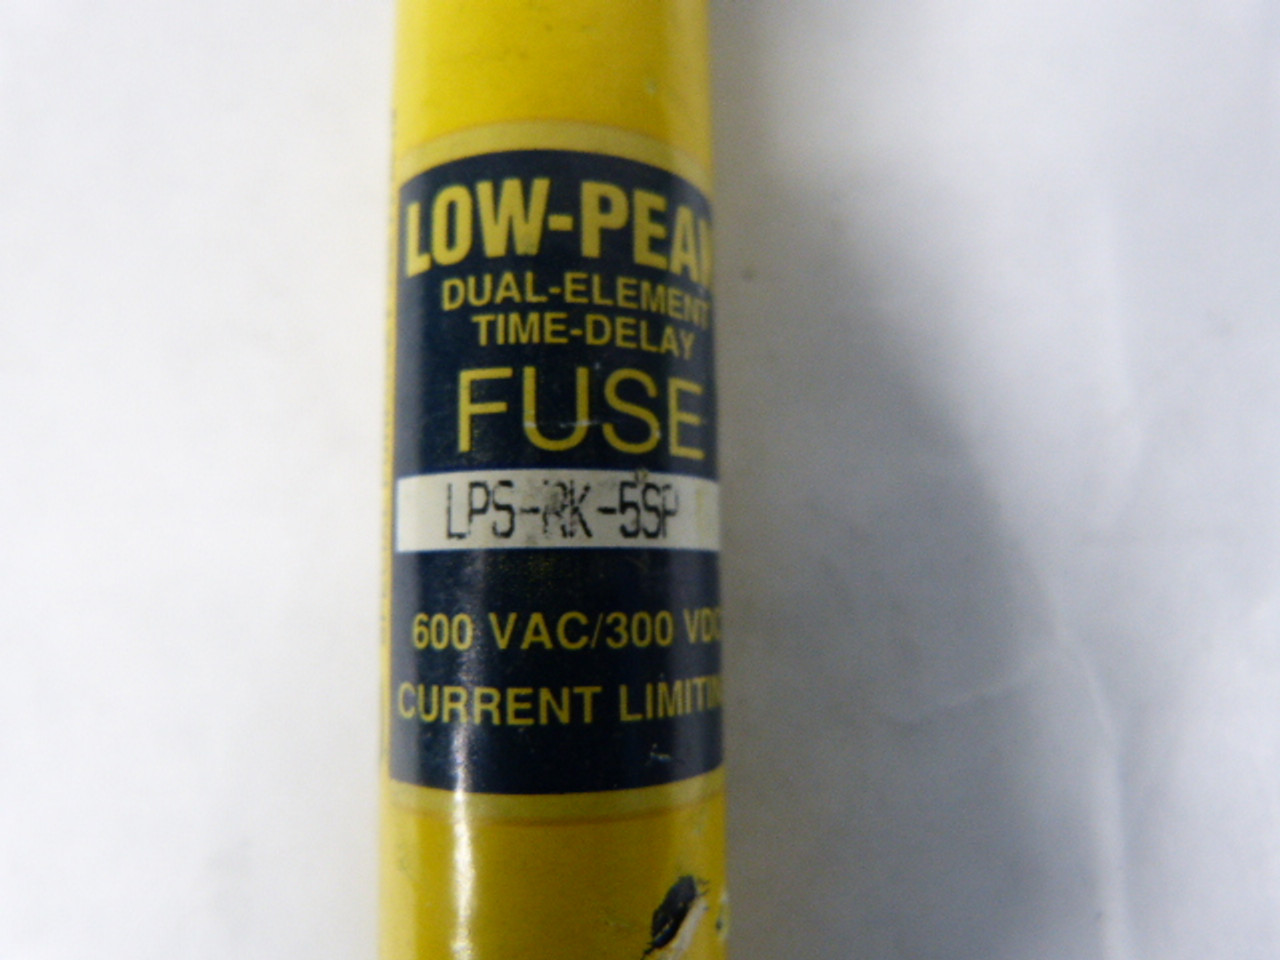 Low-Peak LPS-RK-5SP Dual Element Time Delay Fuse 5A 600V Lot of 10 USED